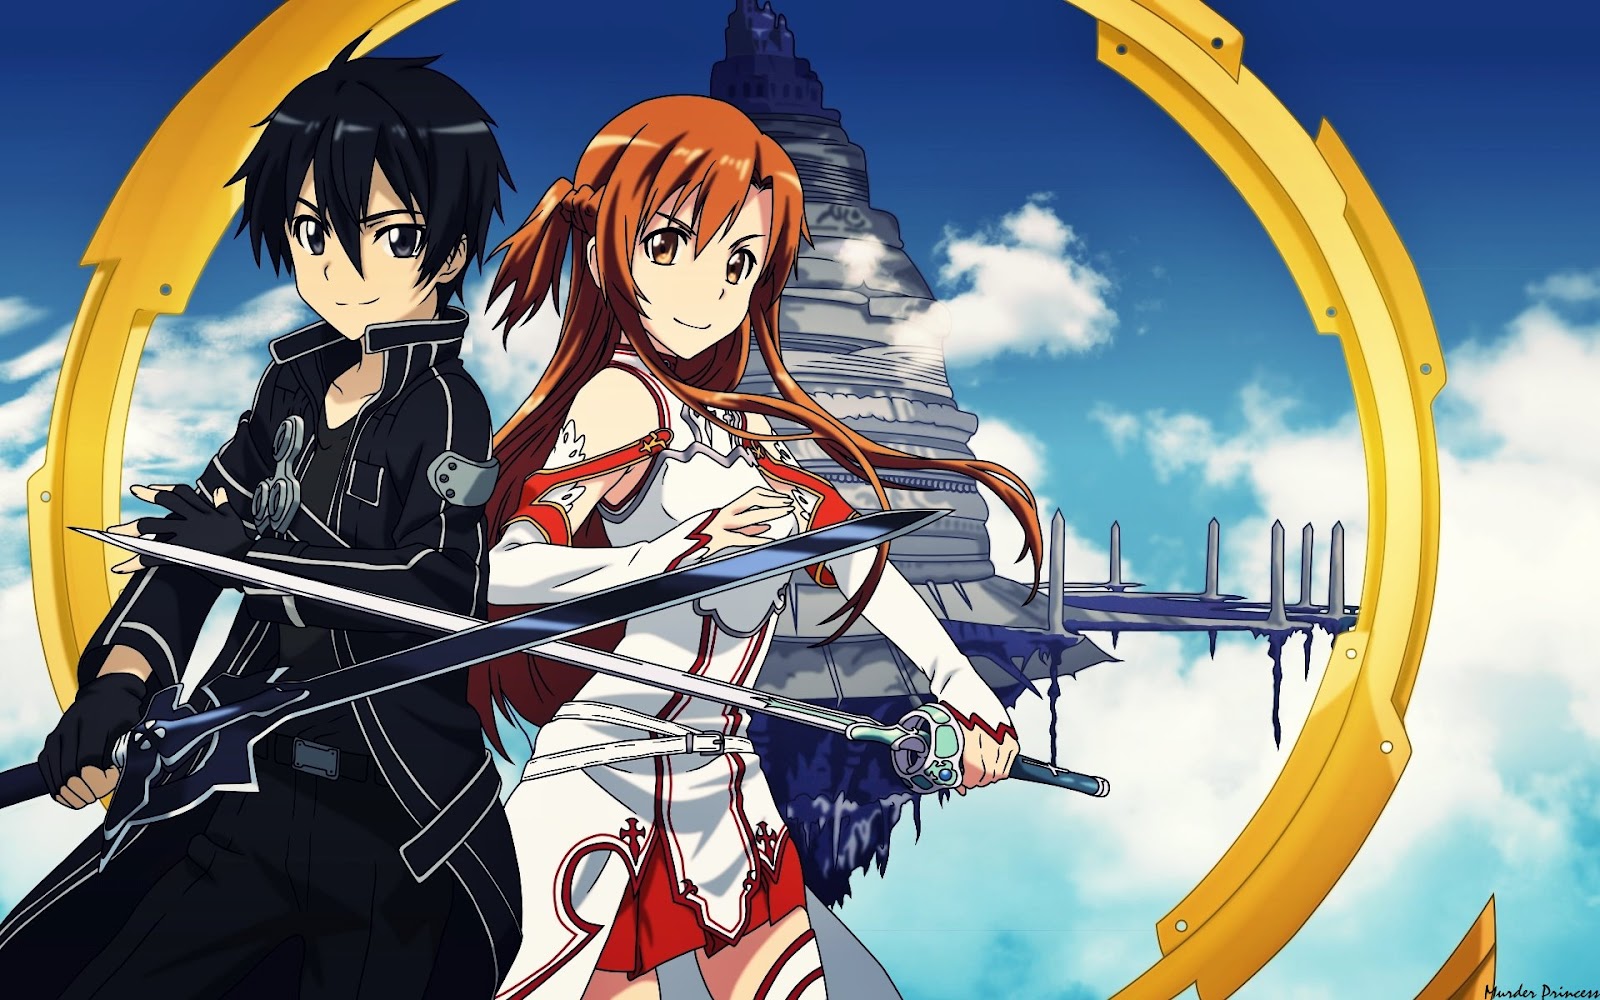 Oculus Showing Sword Art Online Demo for the Oculus Rift at Anime Expo-demhanvico.com.vn